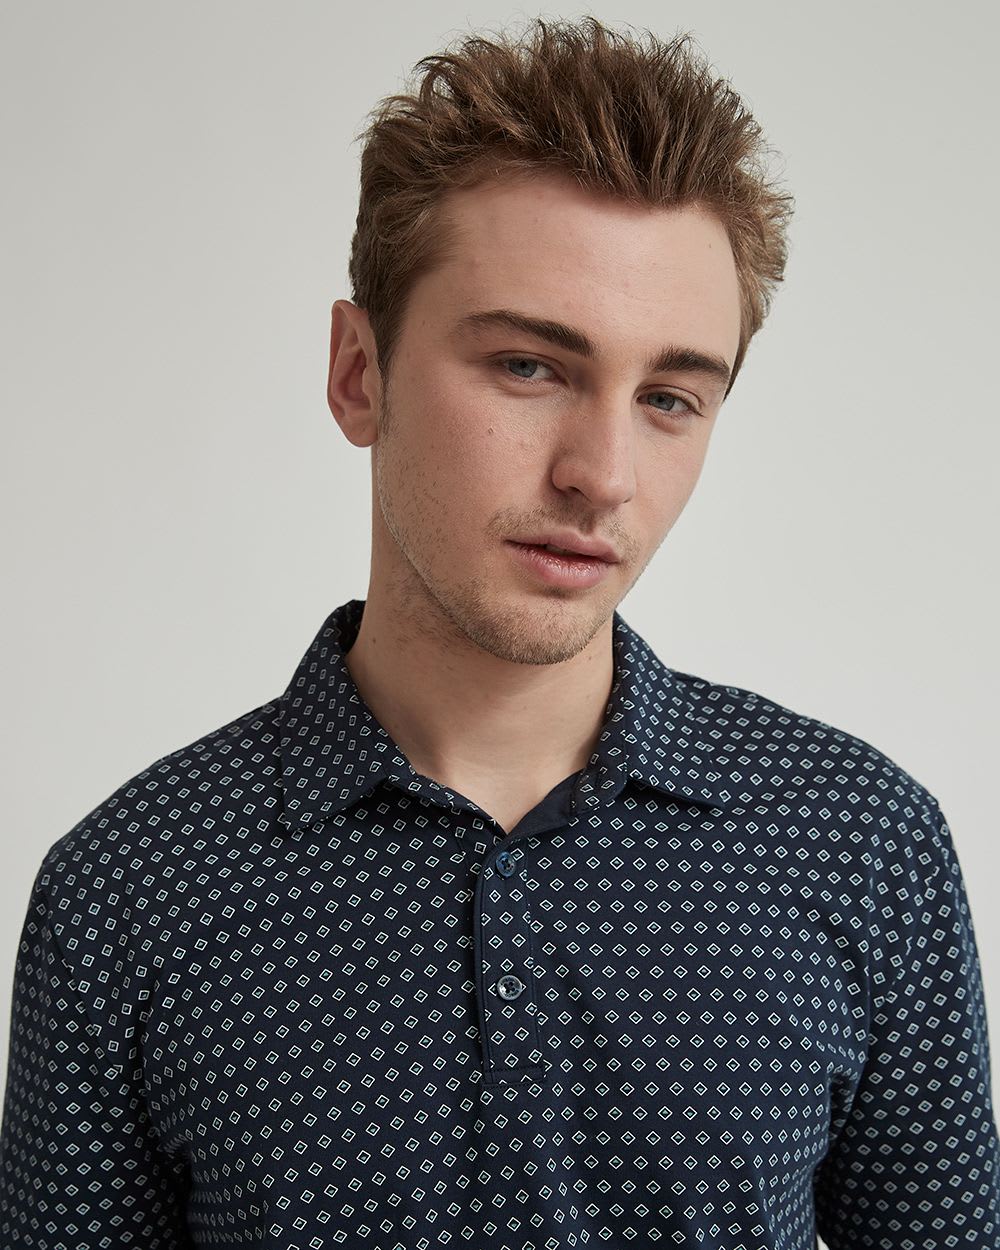 Patterned City Polo